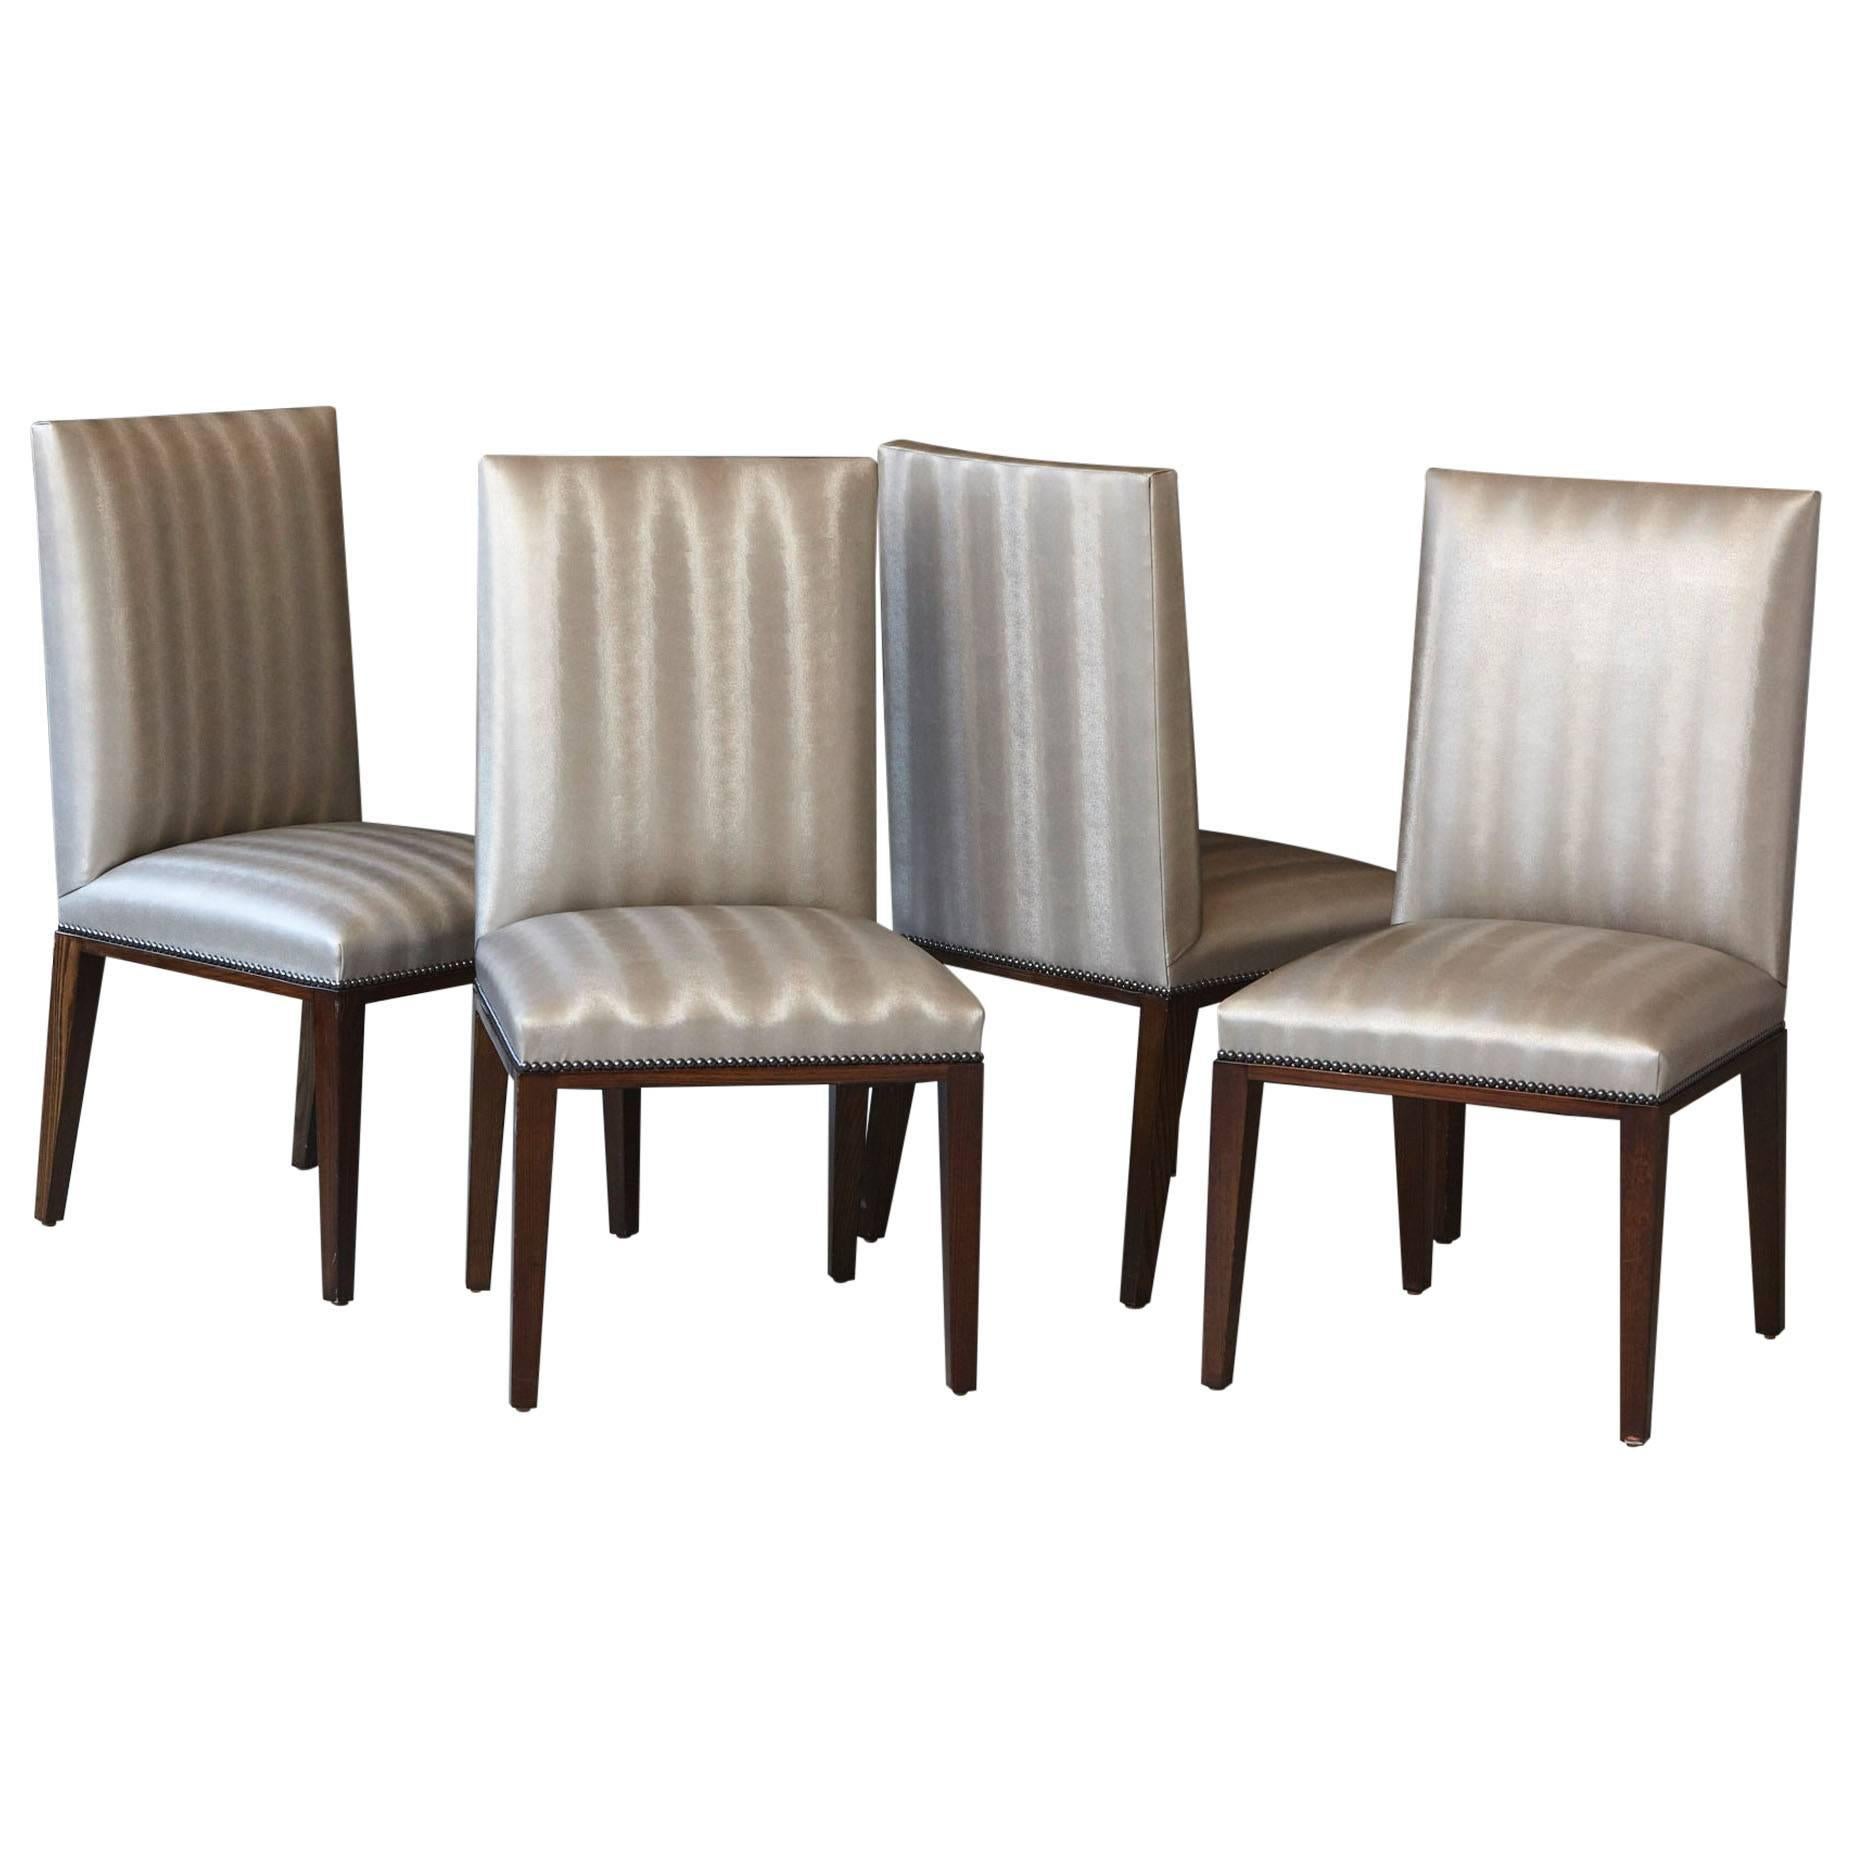 Set of Four Custom Made Dining Chairs in Silver Faux Leather